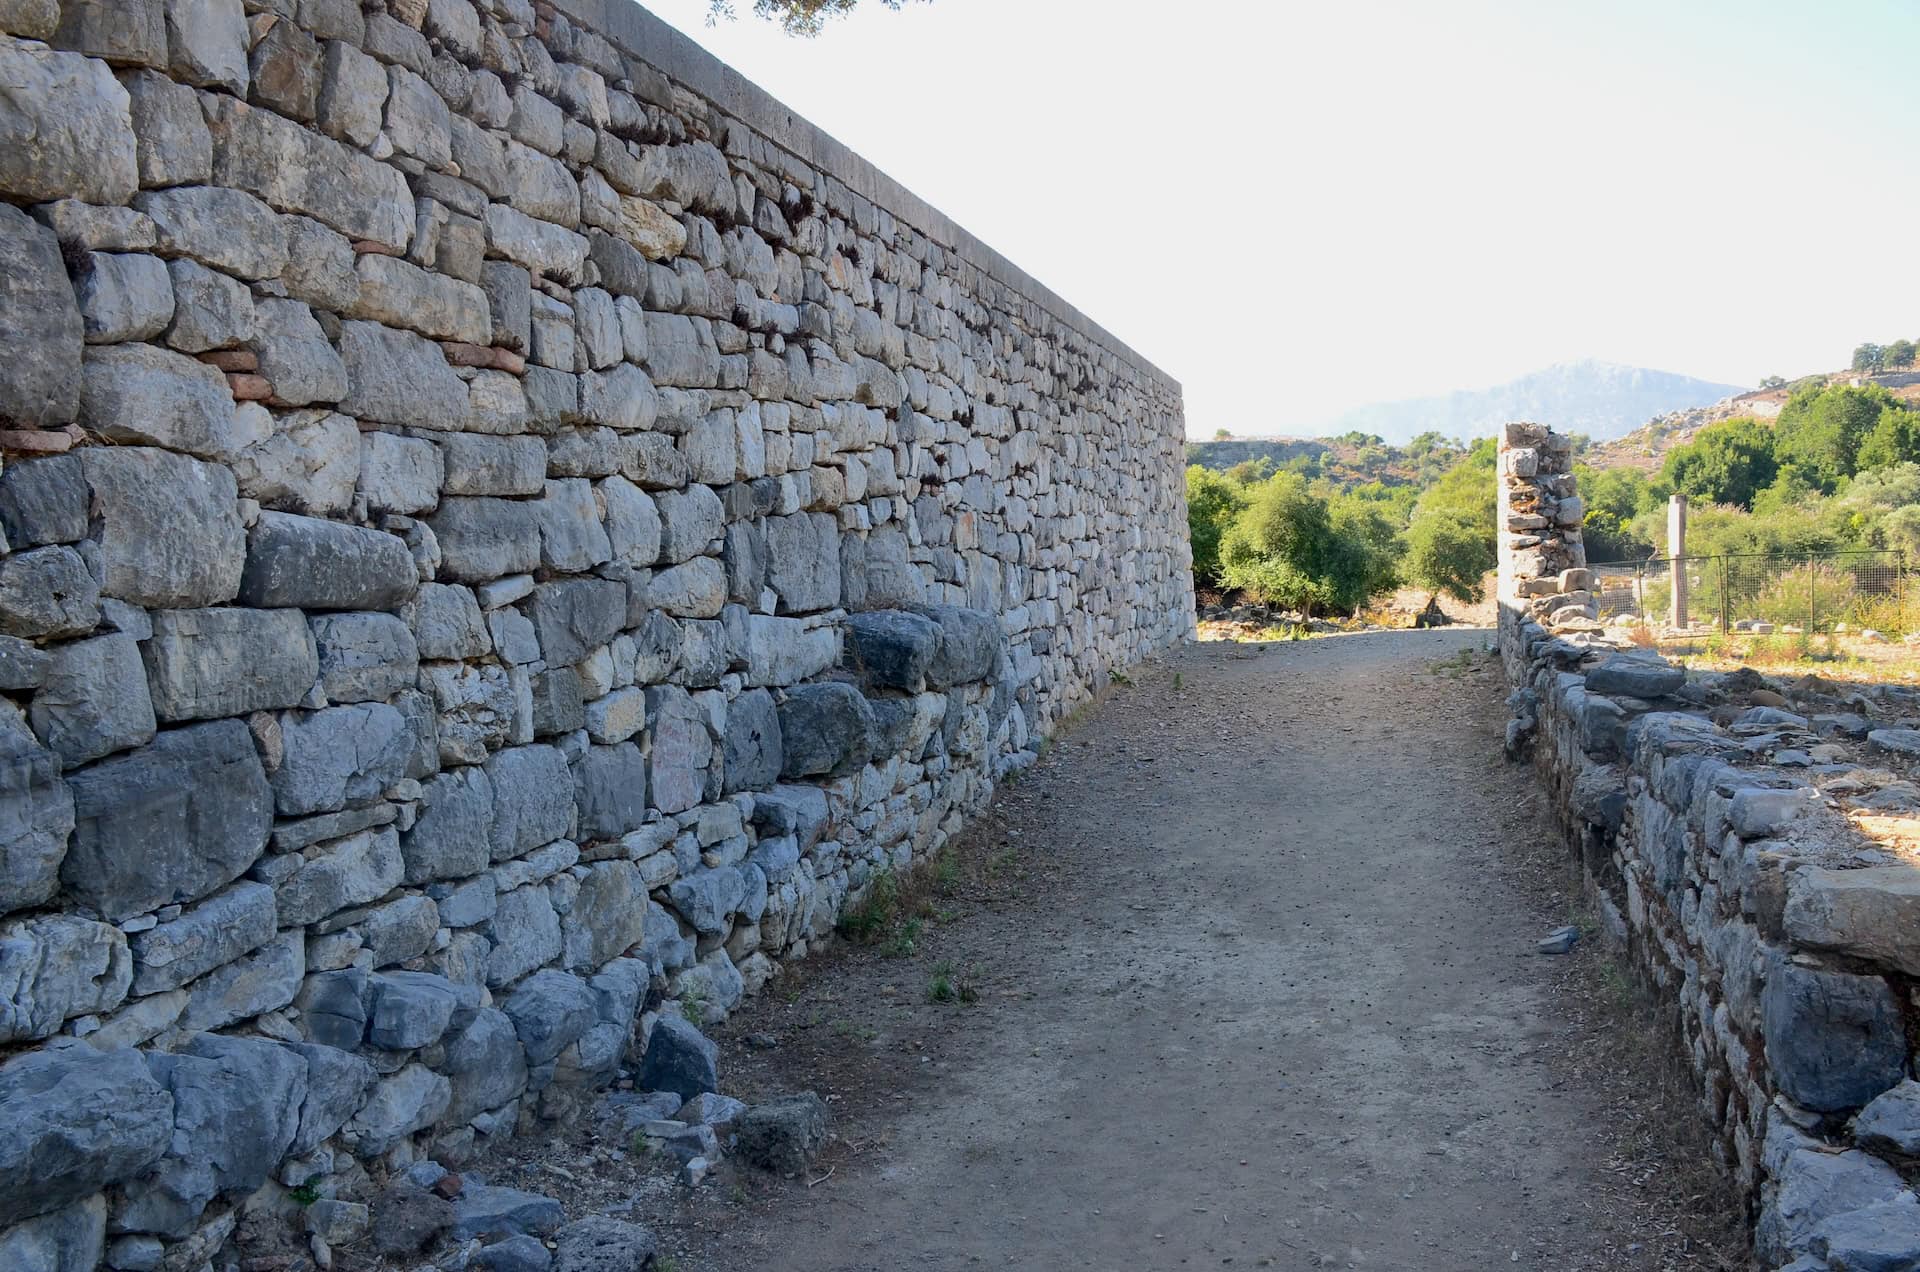 Retaining wall of the Temple Terrace